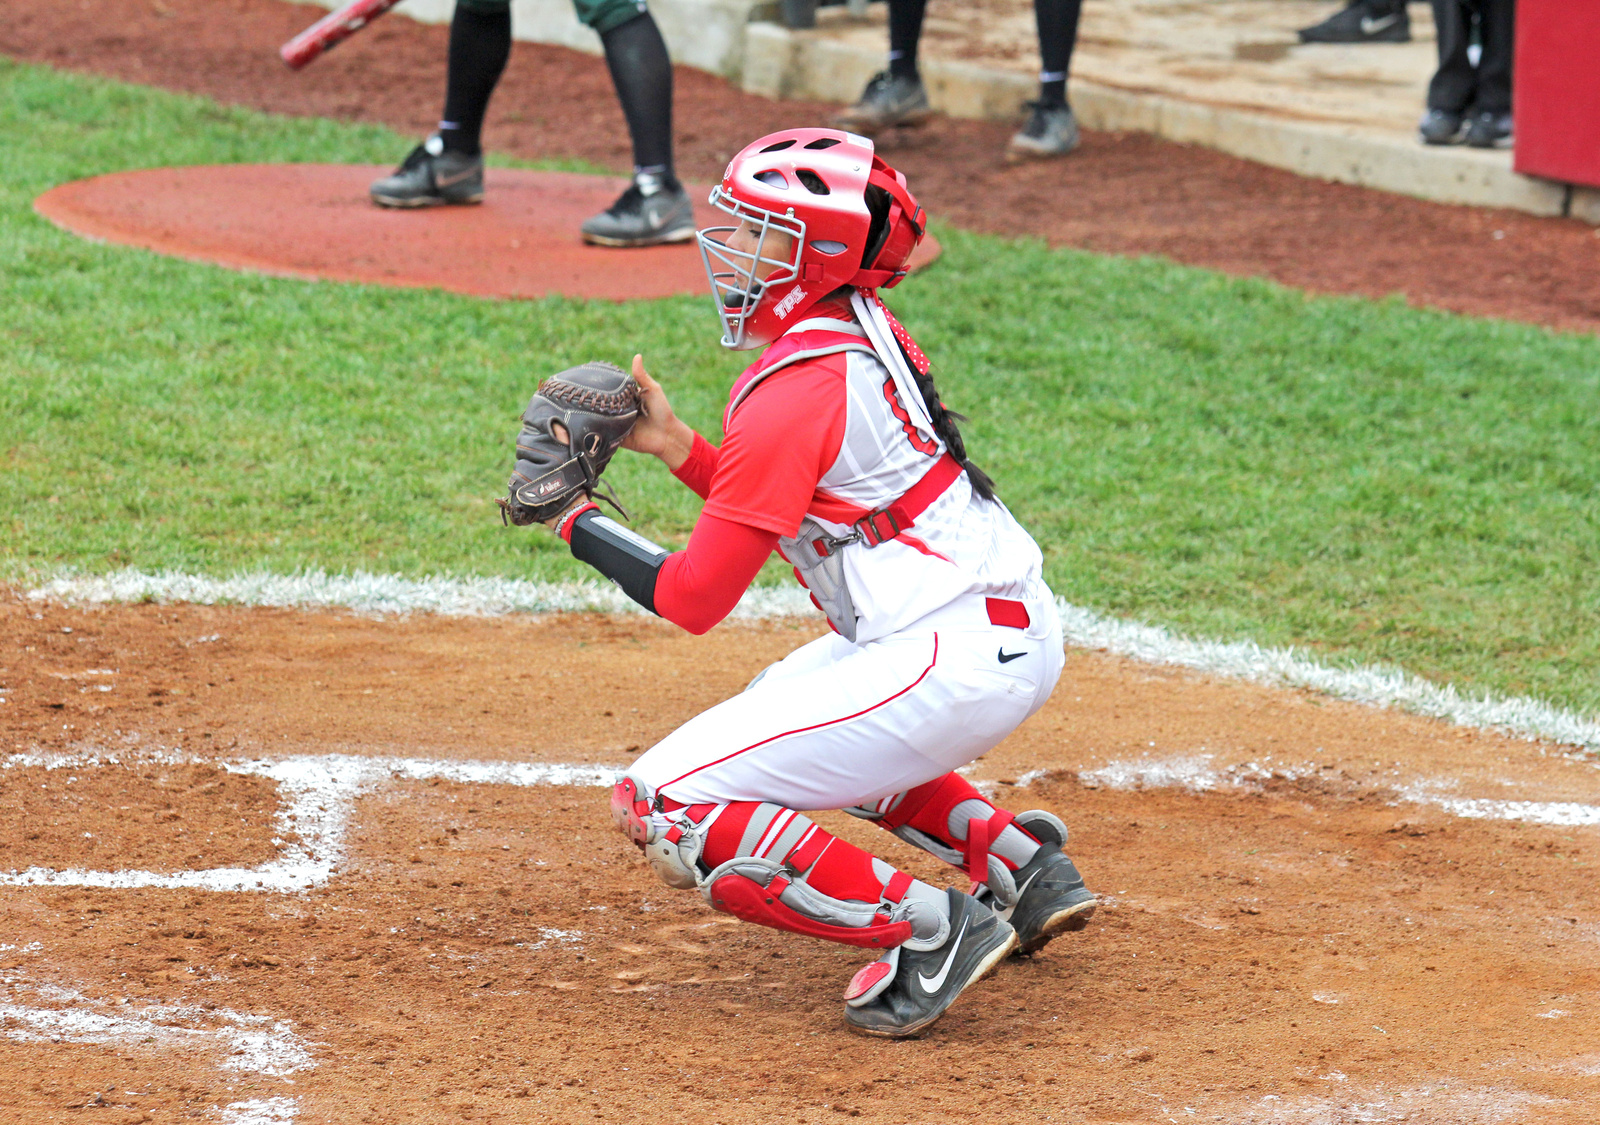 Then-junior catcher Melissa Rennie readies herself for a play during a game against Michigan State April 24, 2013, at Buckeye Field. OSU won, 6-3.